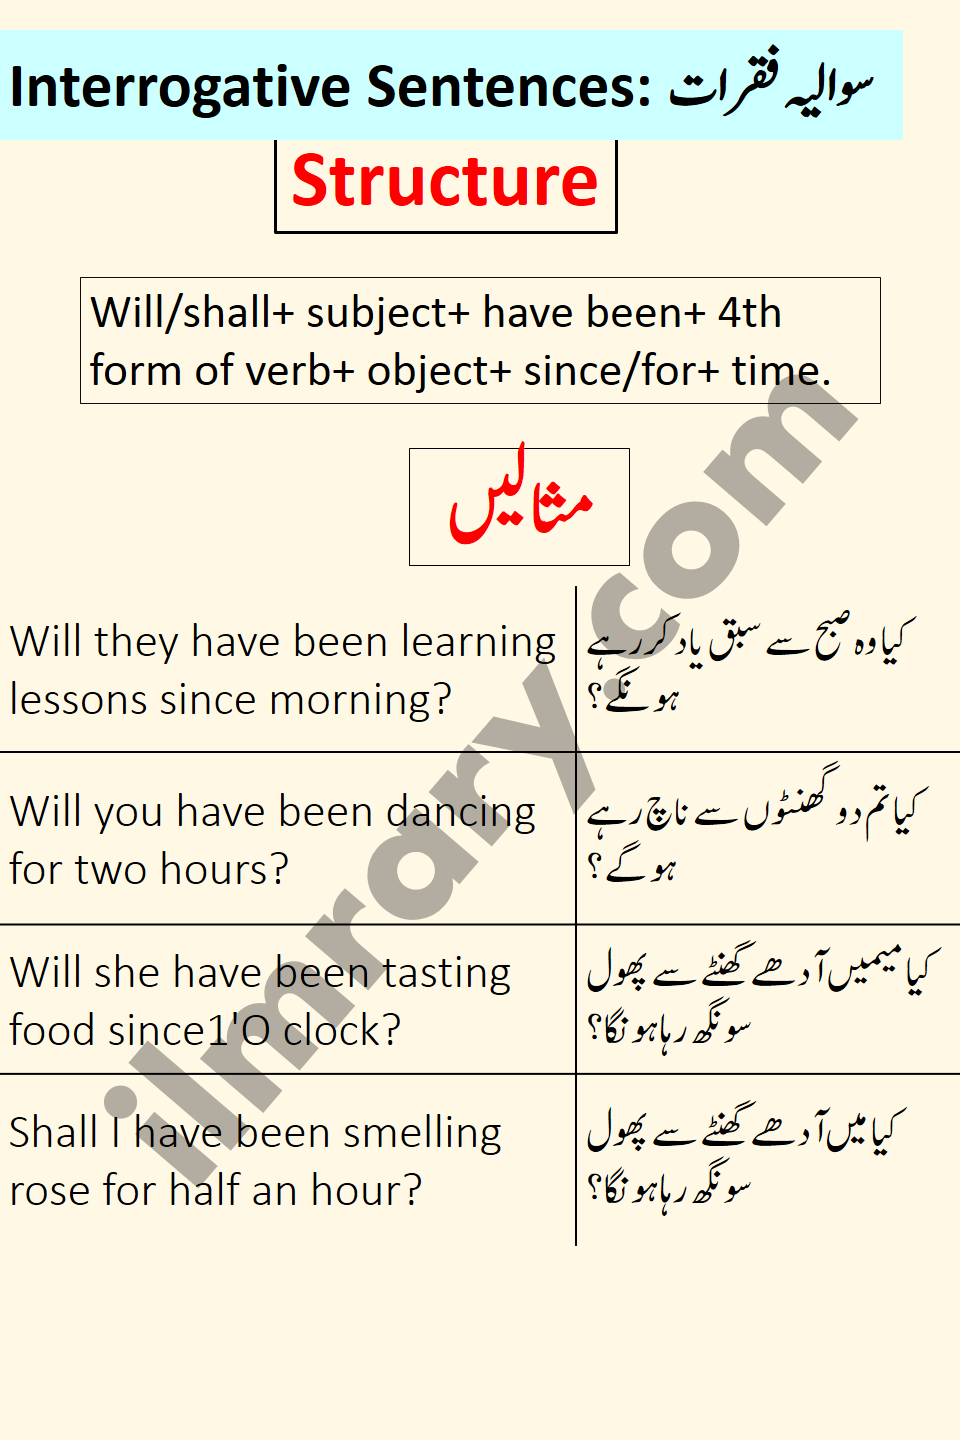 Interrogative Examples for Future Perfect Continuous Tense in Urdu